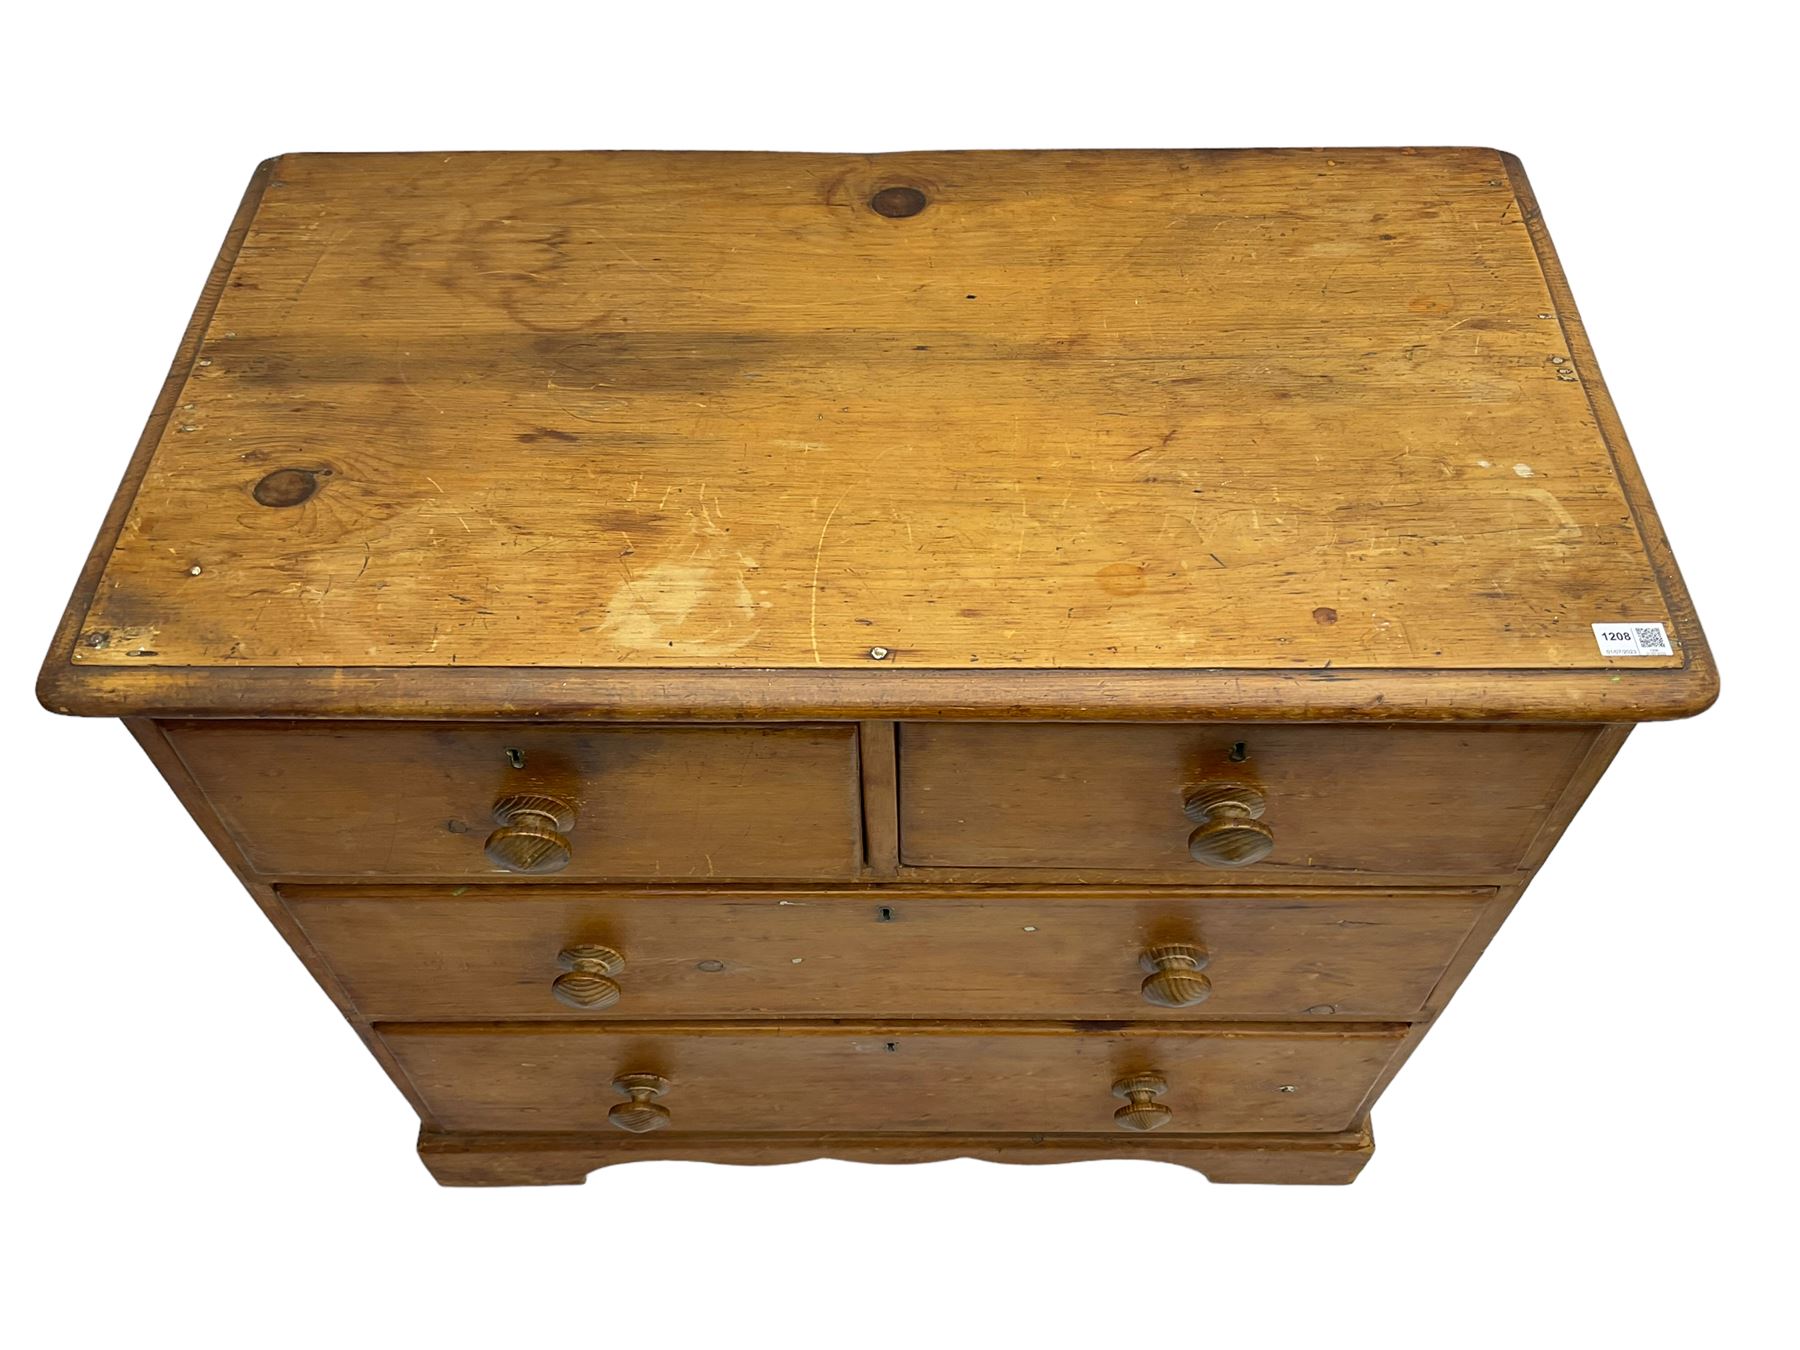 Late 19th century waxed pine chest - Image 4 of 8